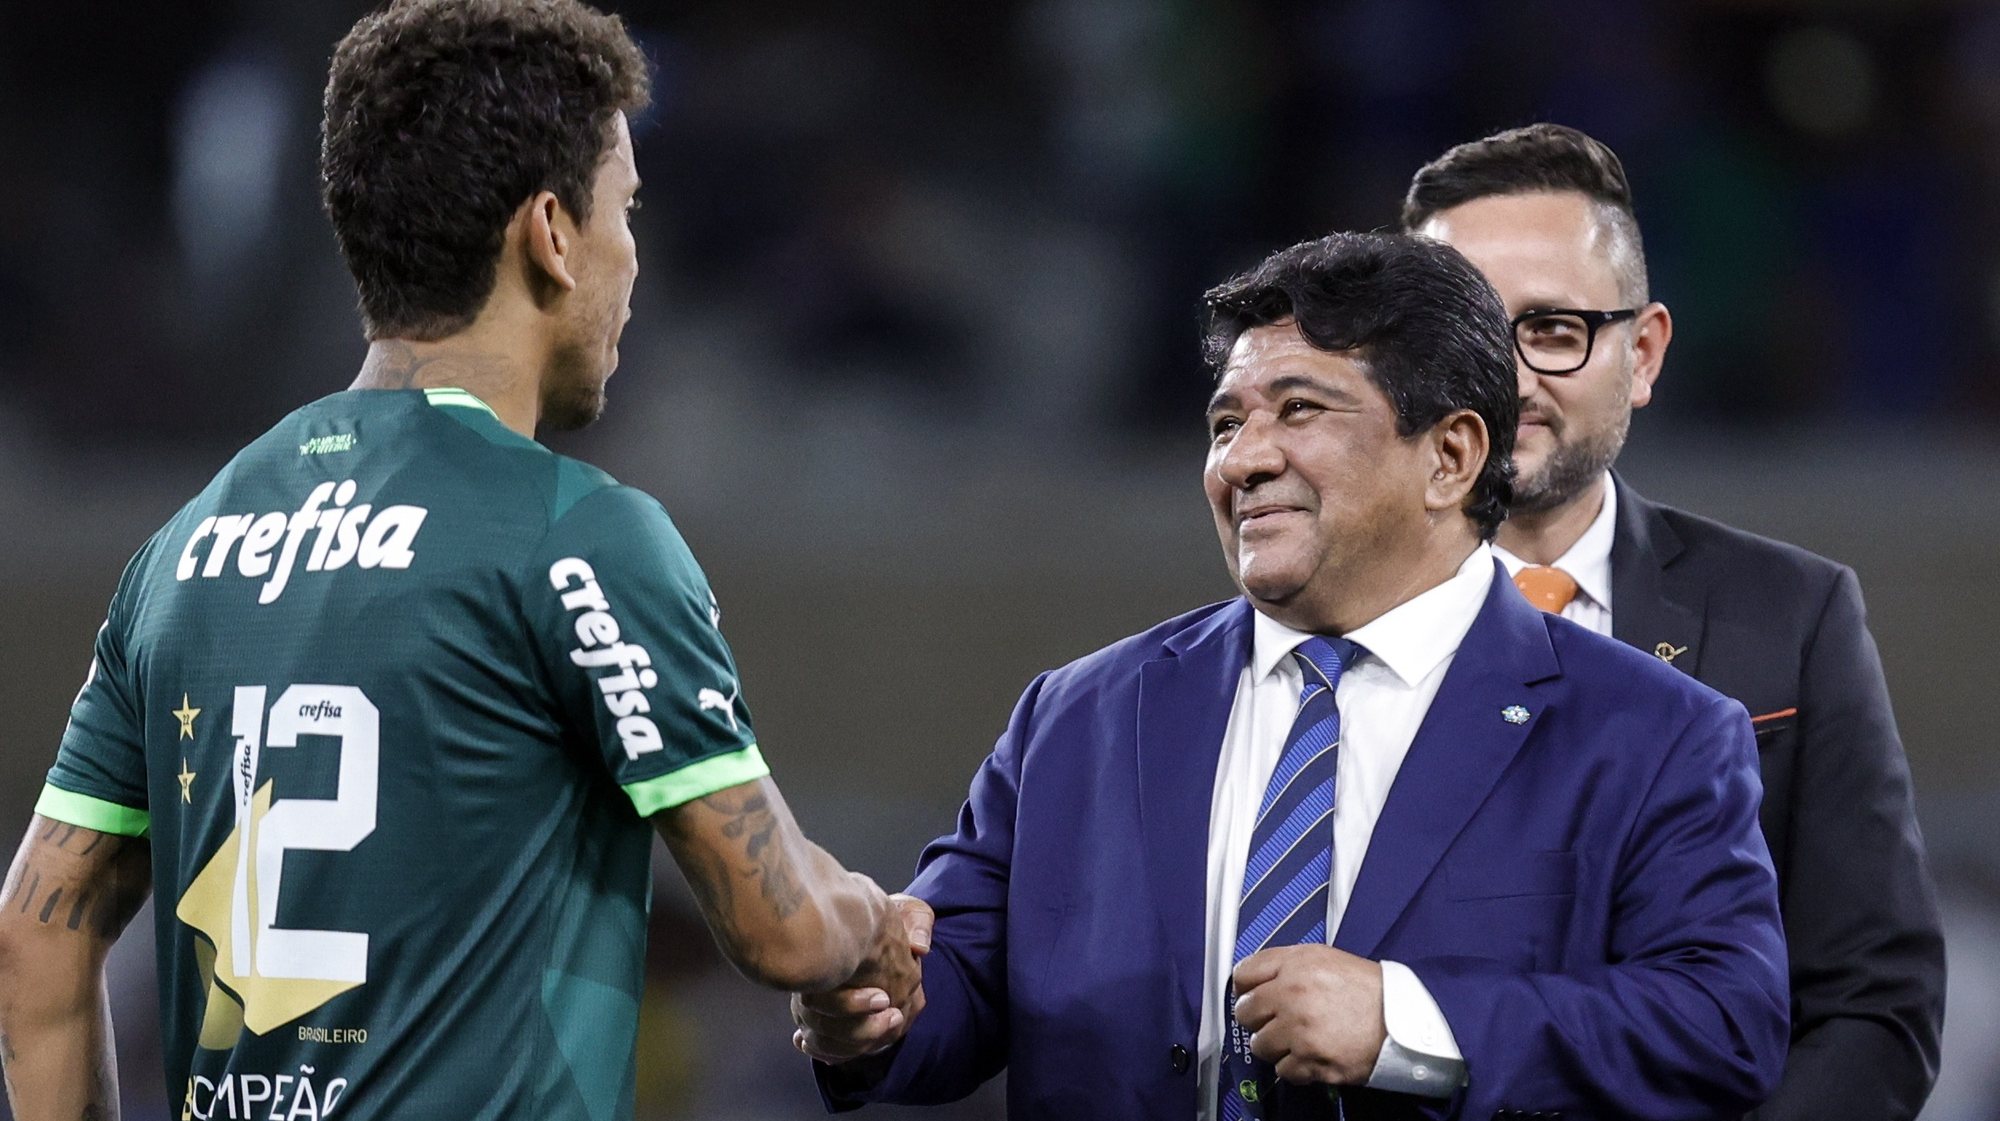 epa11016186 The president of the Brazilian Football Confederation (CBF), Ednaldo Rodrigues reacts during a match between Palmeiras and Cruzeiro, in Belo Horizonte, Brazil, on 6 December 2023 (Issued 7 December 2023). A court in Rio de Janeiro dismissed on 07 December the president of the Brazilian Football Confederation (CBF), Ednaldo Rodrigues, and in his place appointed an auditor to continue leading the organization. The court annulled Rodrigues&#039; election, held in 2022, considering that a modification to the electoral rules introduced shortly before the vote was invalid, according to local media.  EPA/Yuri Edmundo